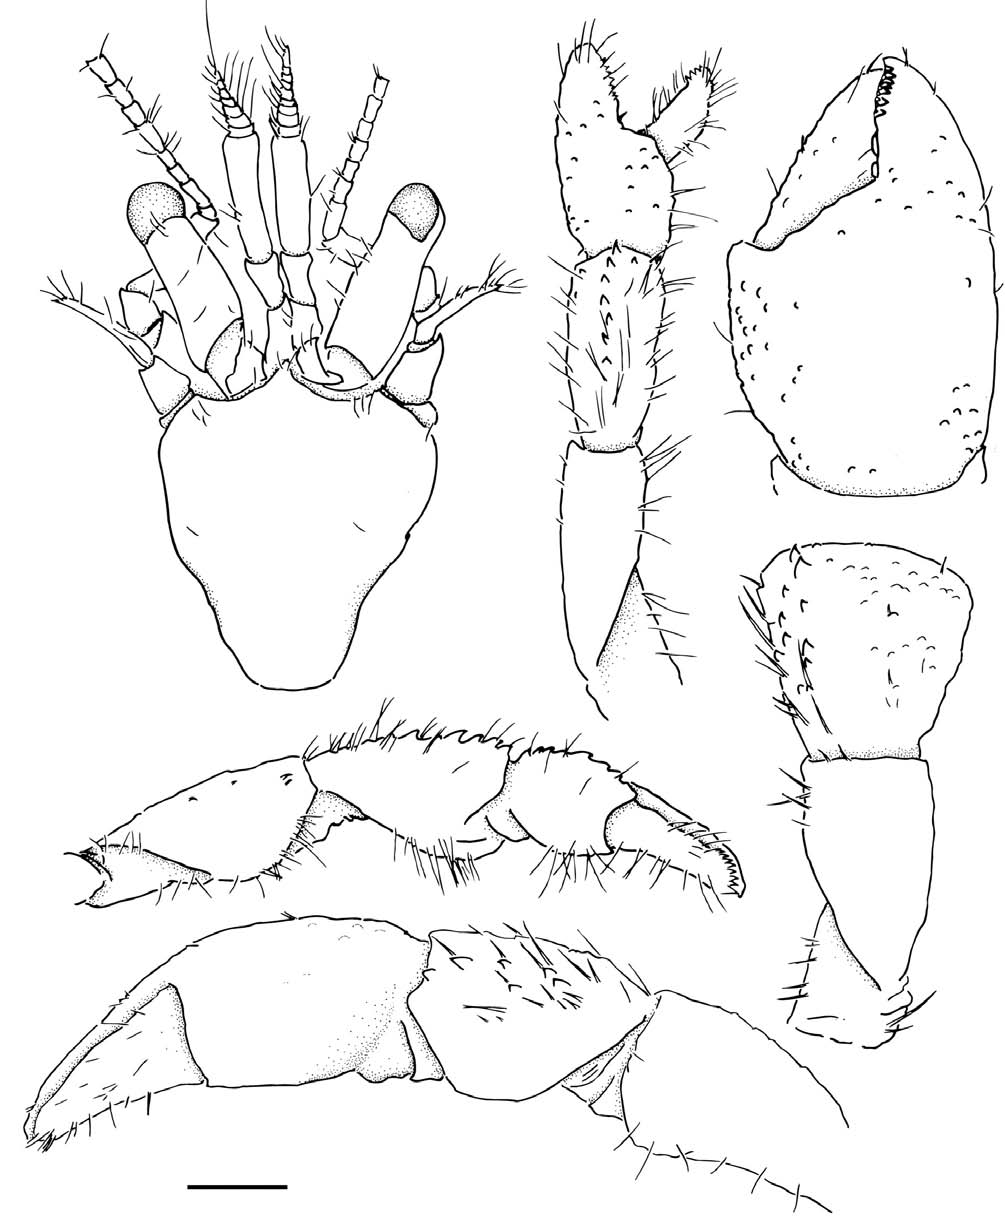 Pagurixus patiae. A Shield and cephalic appendages dorsal view; B Chela of right cheliped dorsal view; C Carpus and merus of right cheliped; D Entire left cheliped dorsal view; E Entire right cheliped mesial view; F Entire left cheliped mesial view. Scale bar: A-F=0.5 mm.